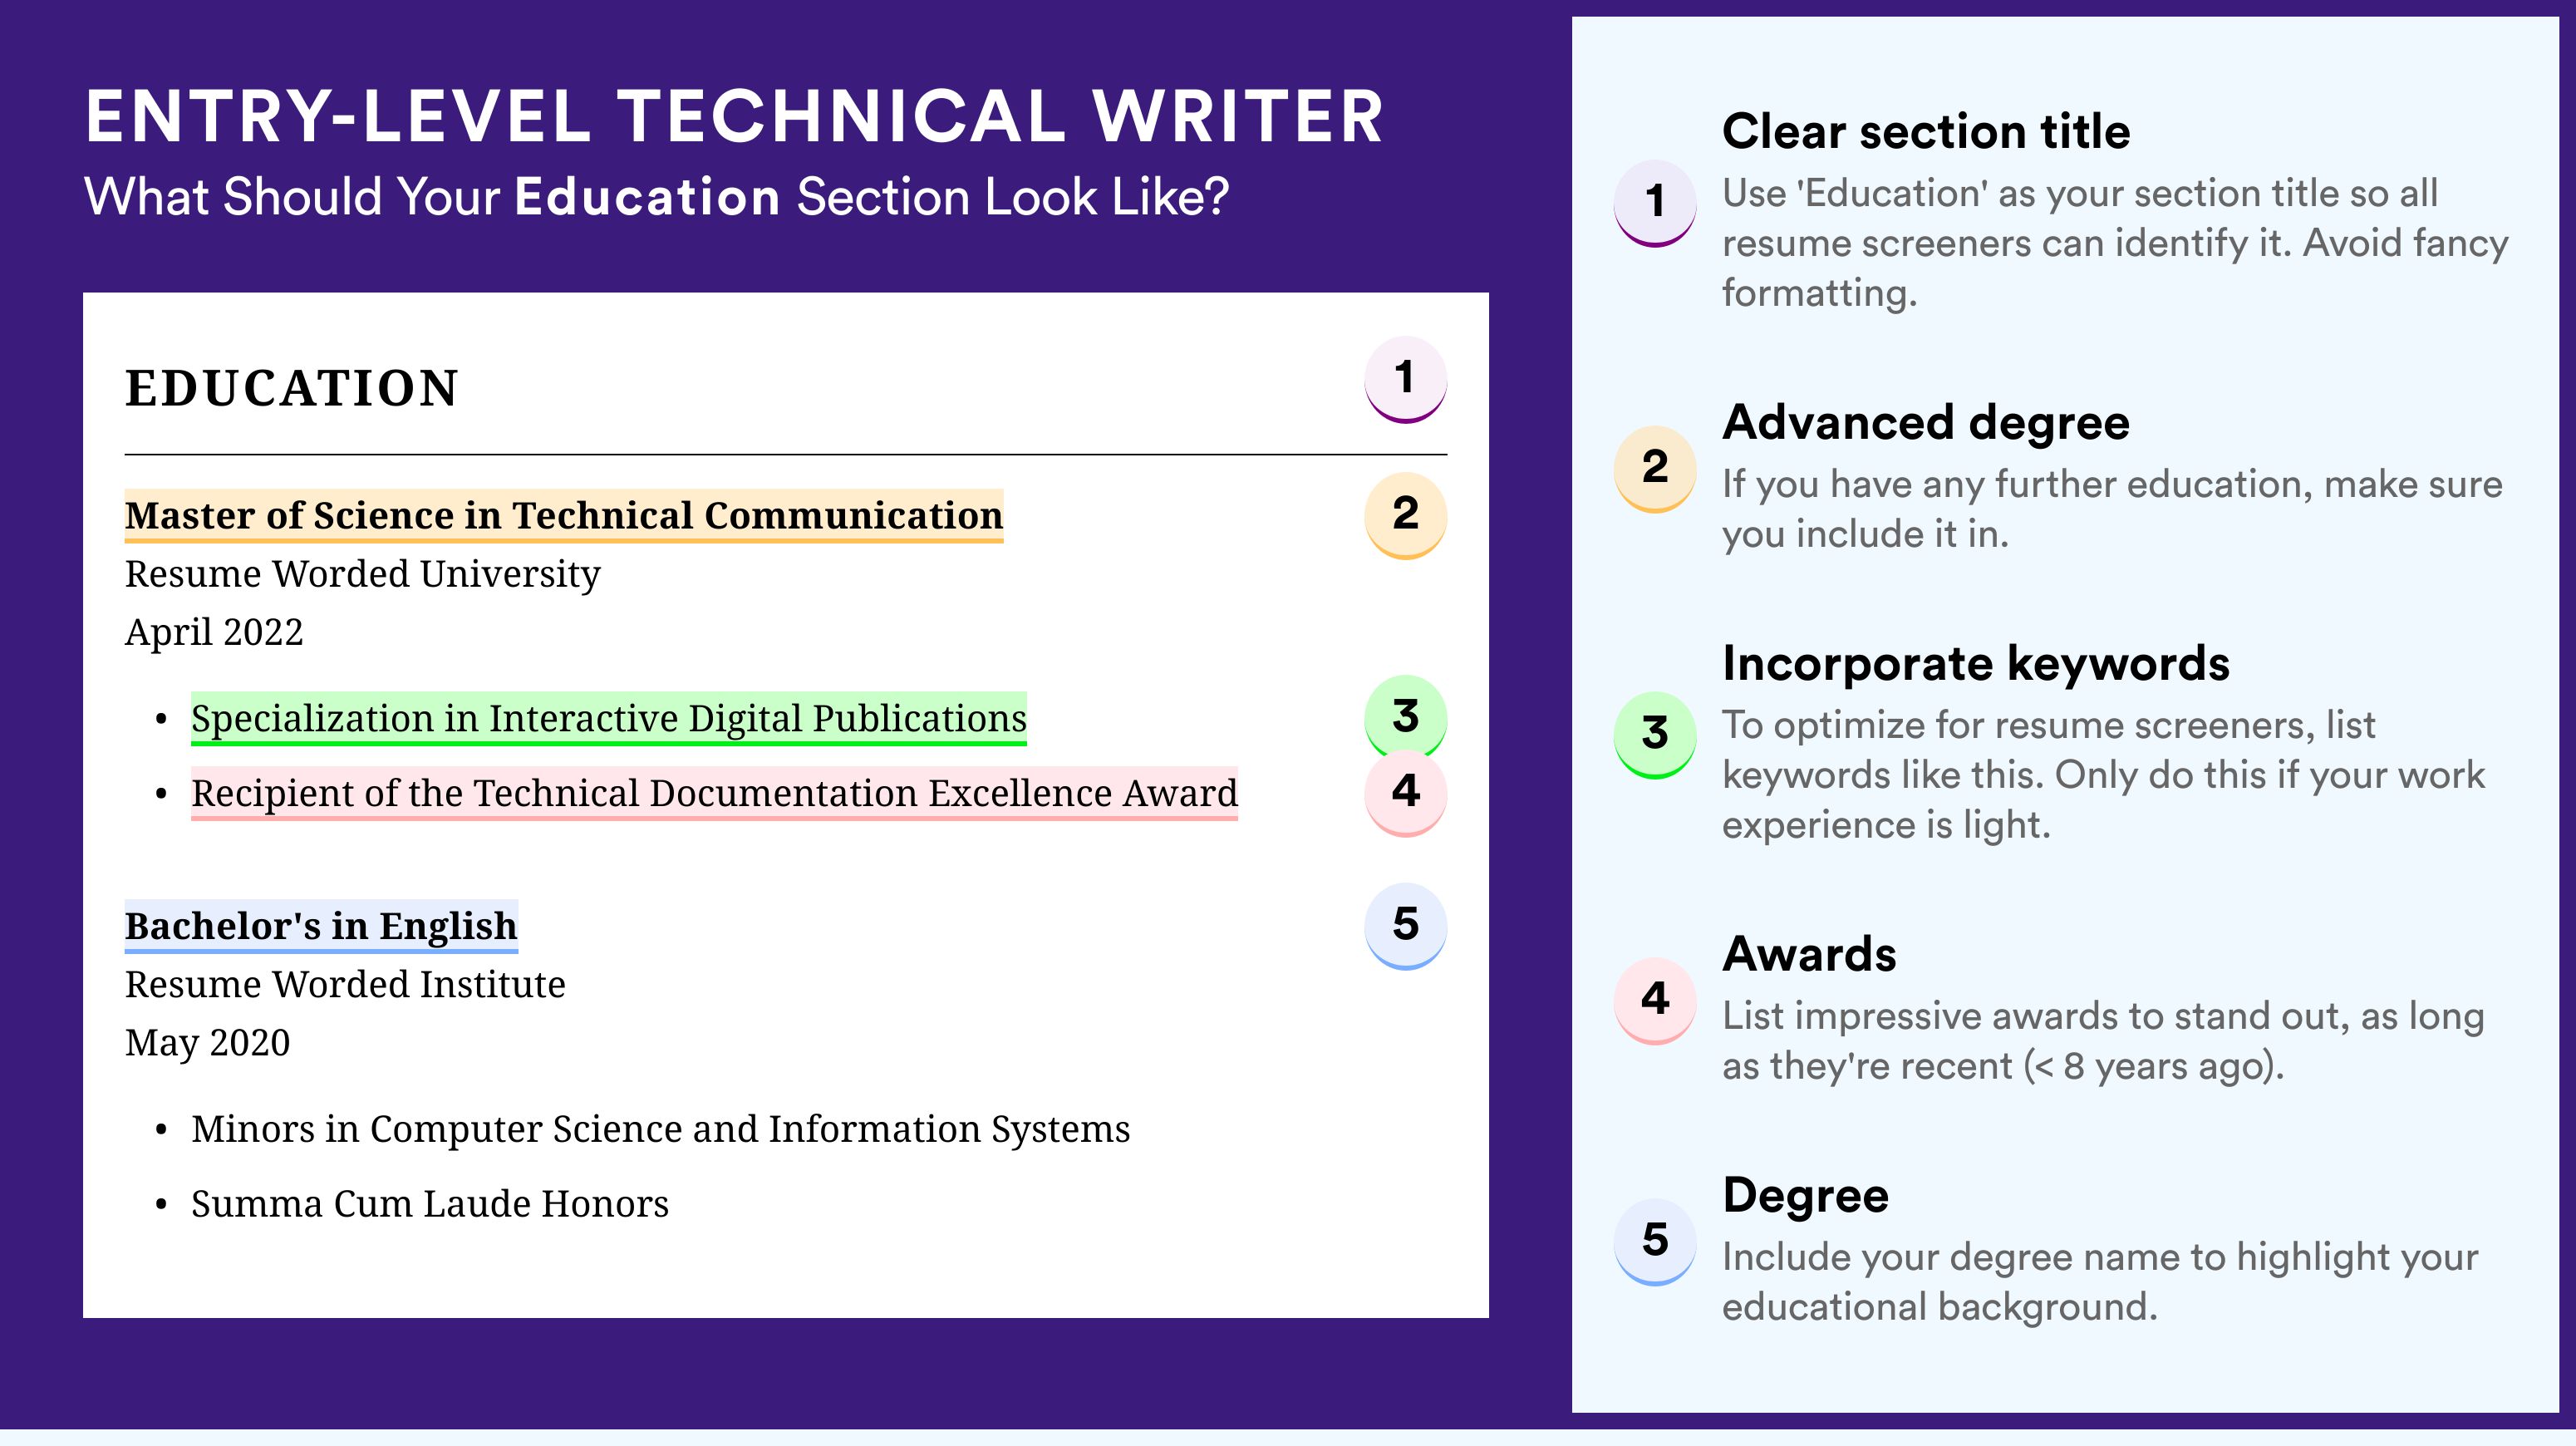 How To Write An Education Section - Entry-Level Technical Writer Roles